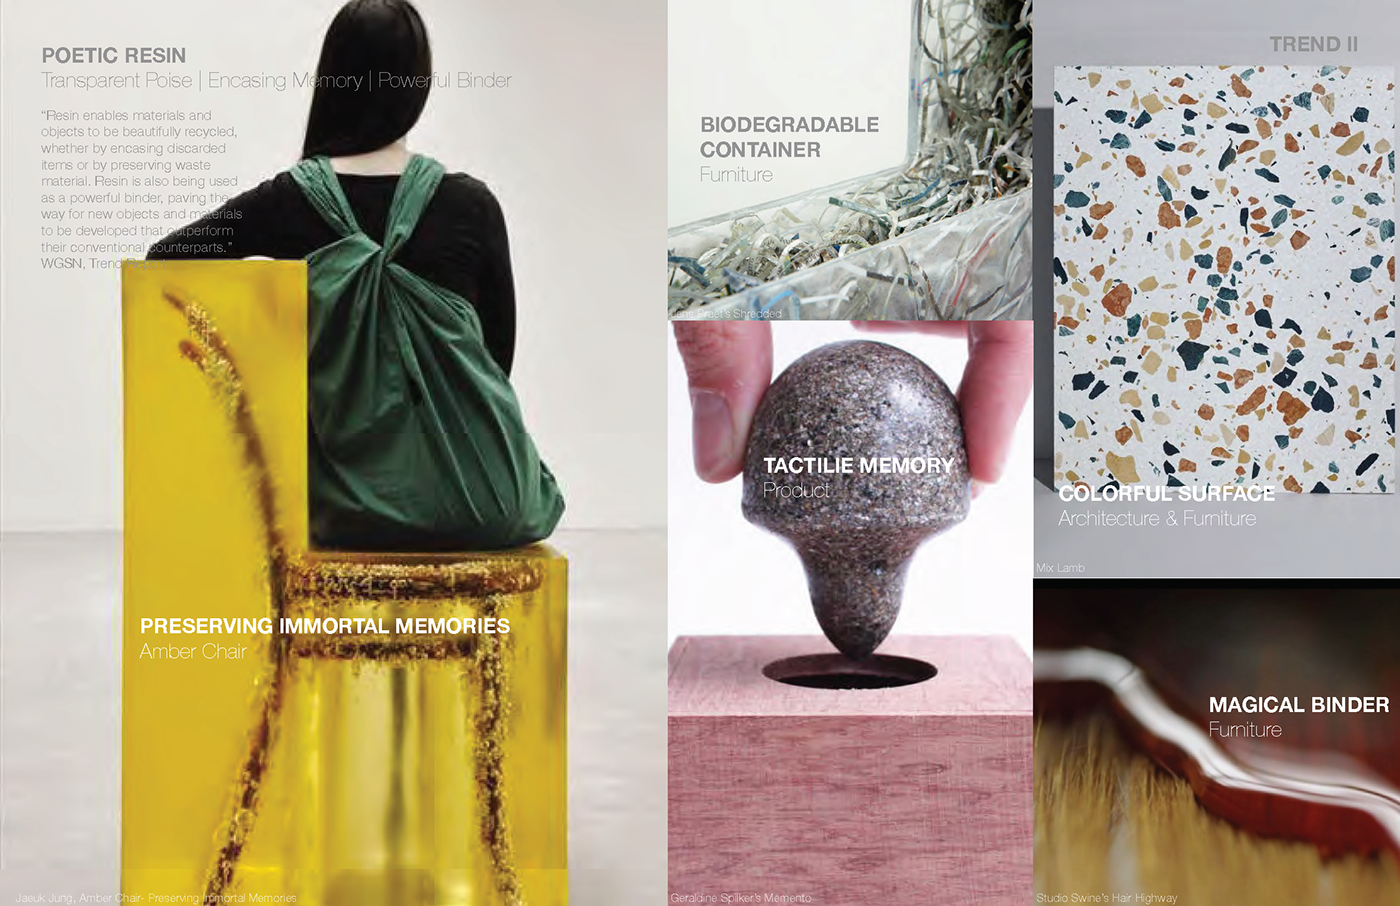 Color and materials surface creation craftsmanship trends research material experimentation